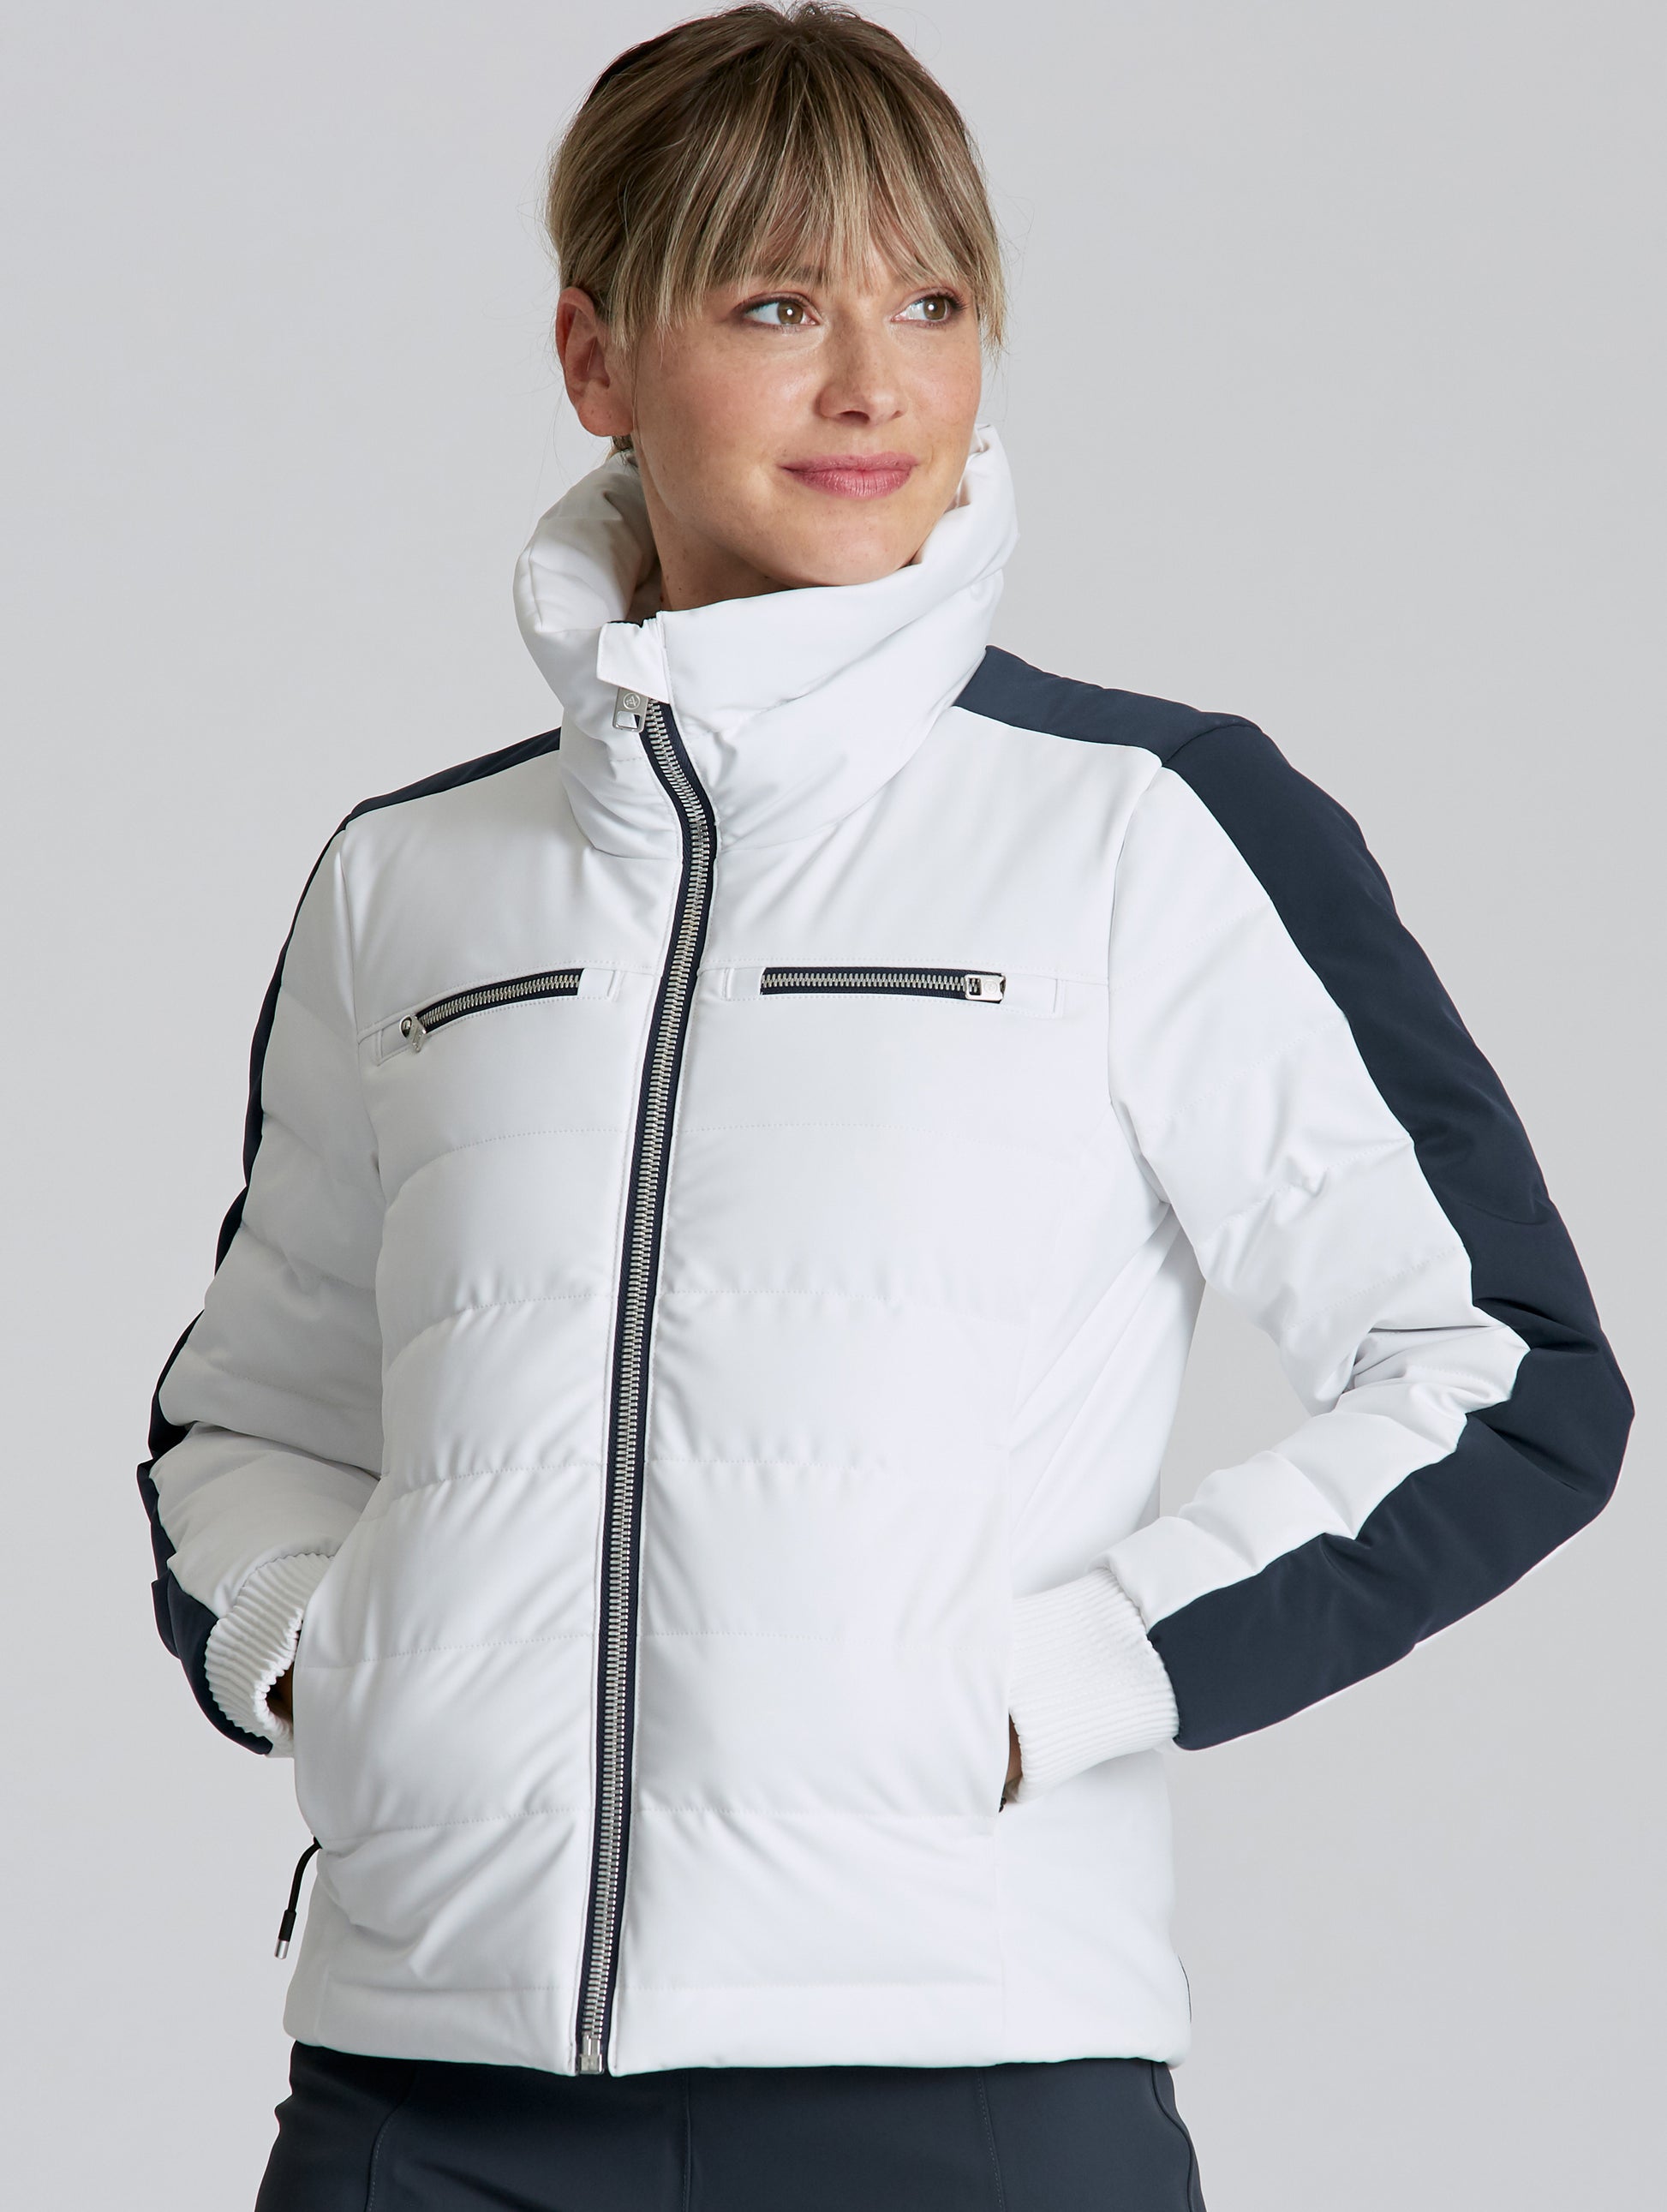 Front view of woman wearing W Nordic Jacket in studio